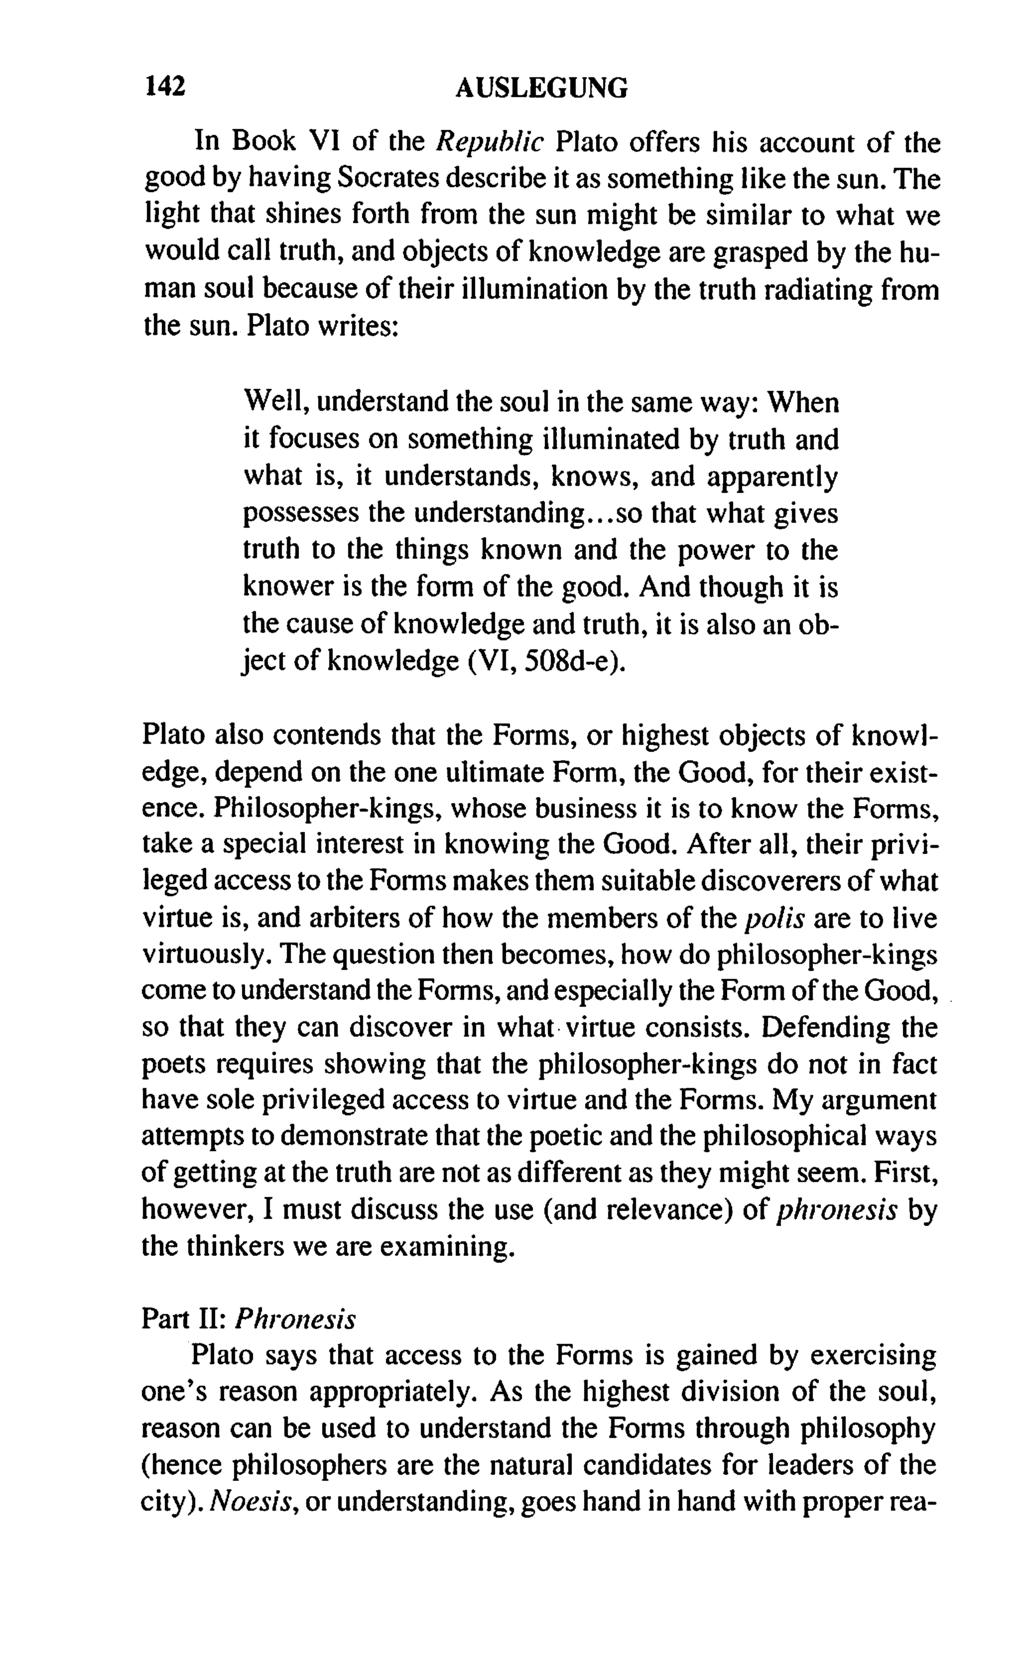 142 AUSLEGUNG In Book VI of the Republic Plato offers his account of the good by having Socrates describe it as something like the sun.